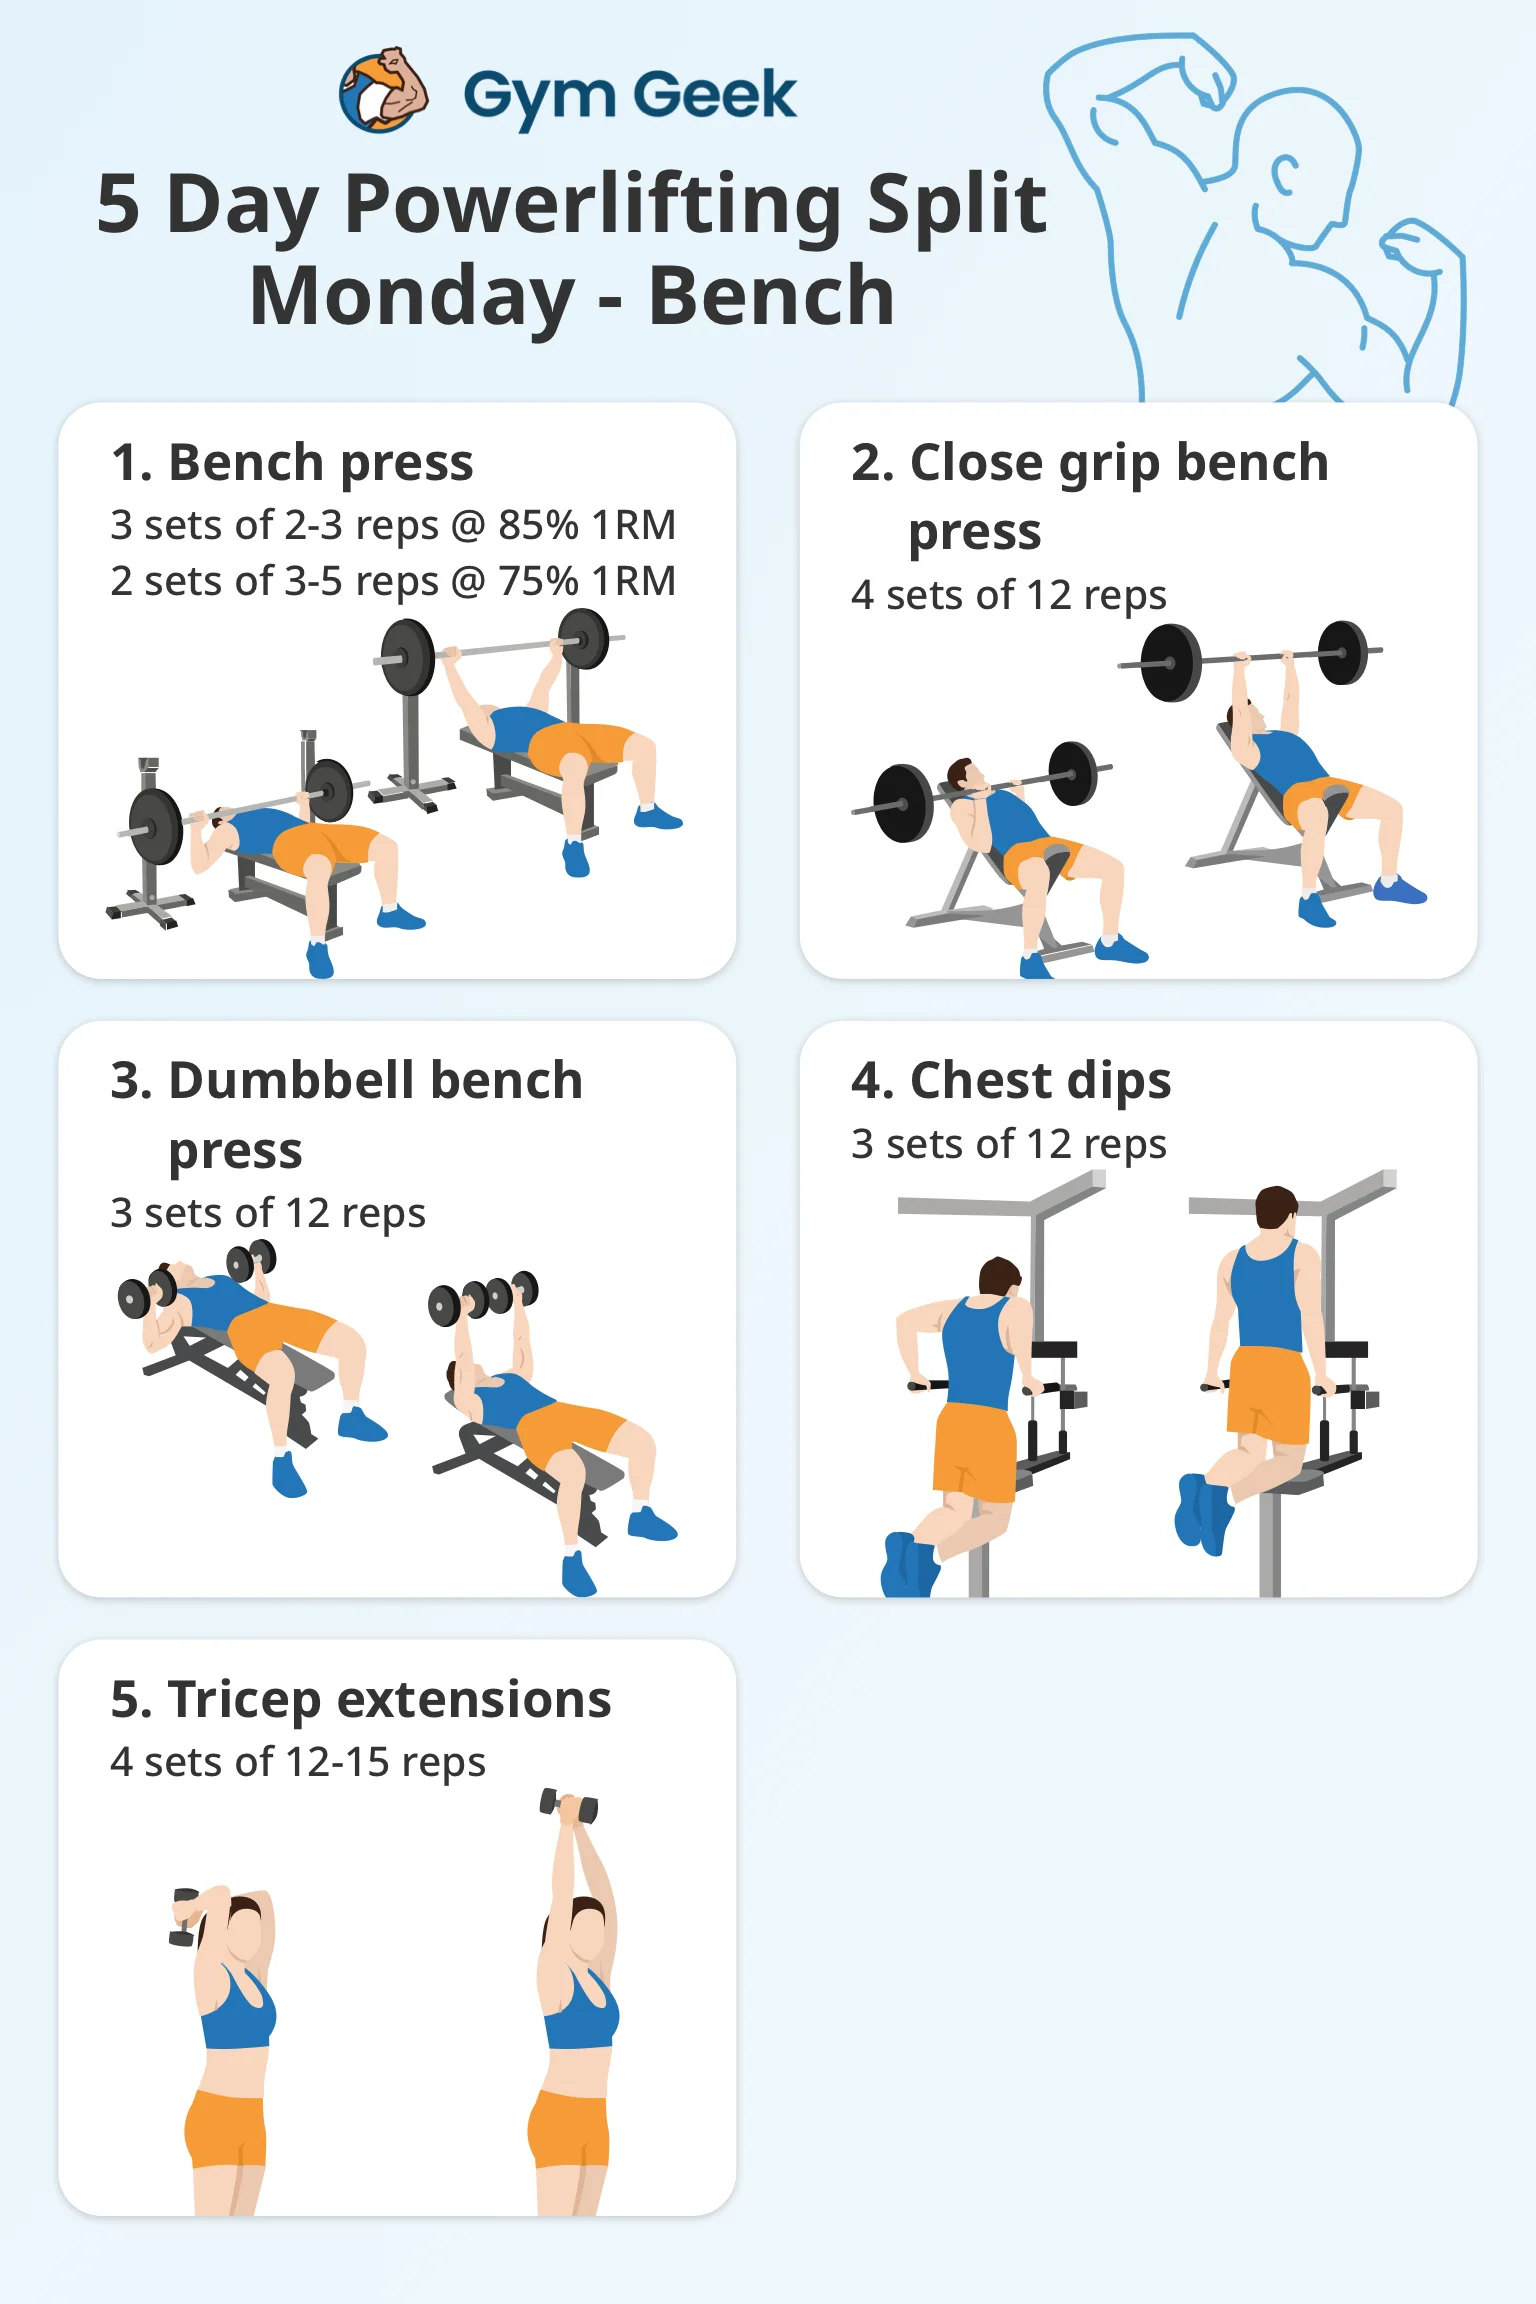 infographic - 5 day powerlifting program - Monday (Bench day)